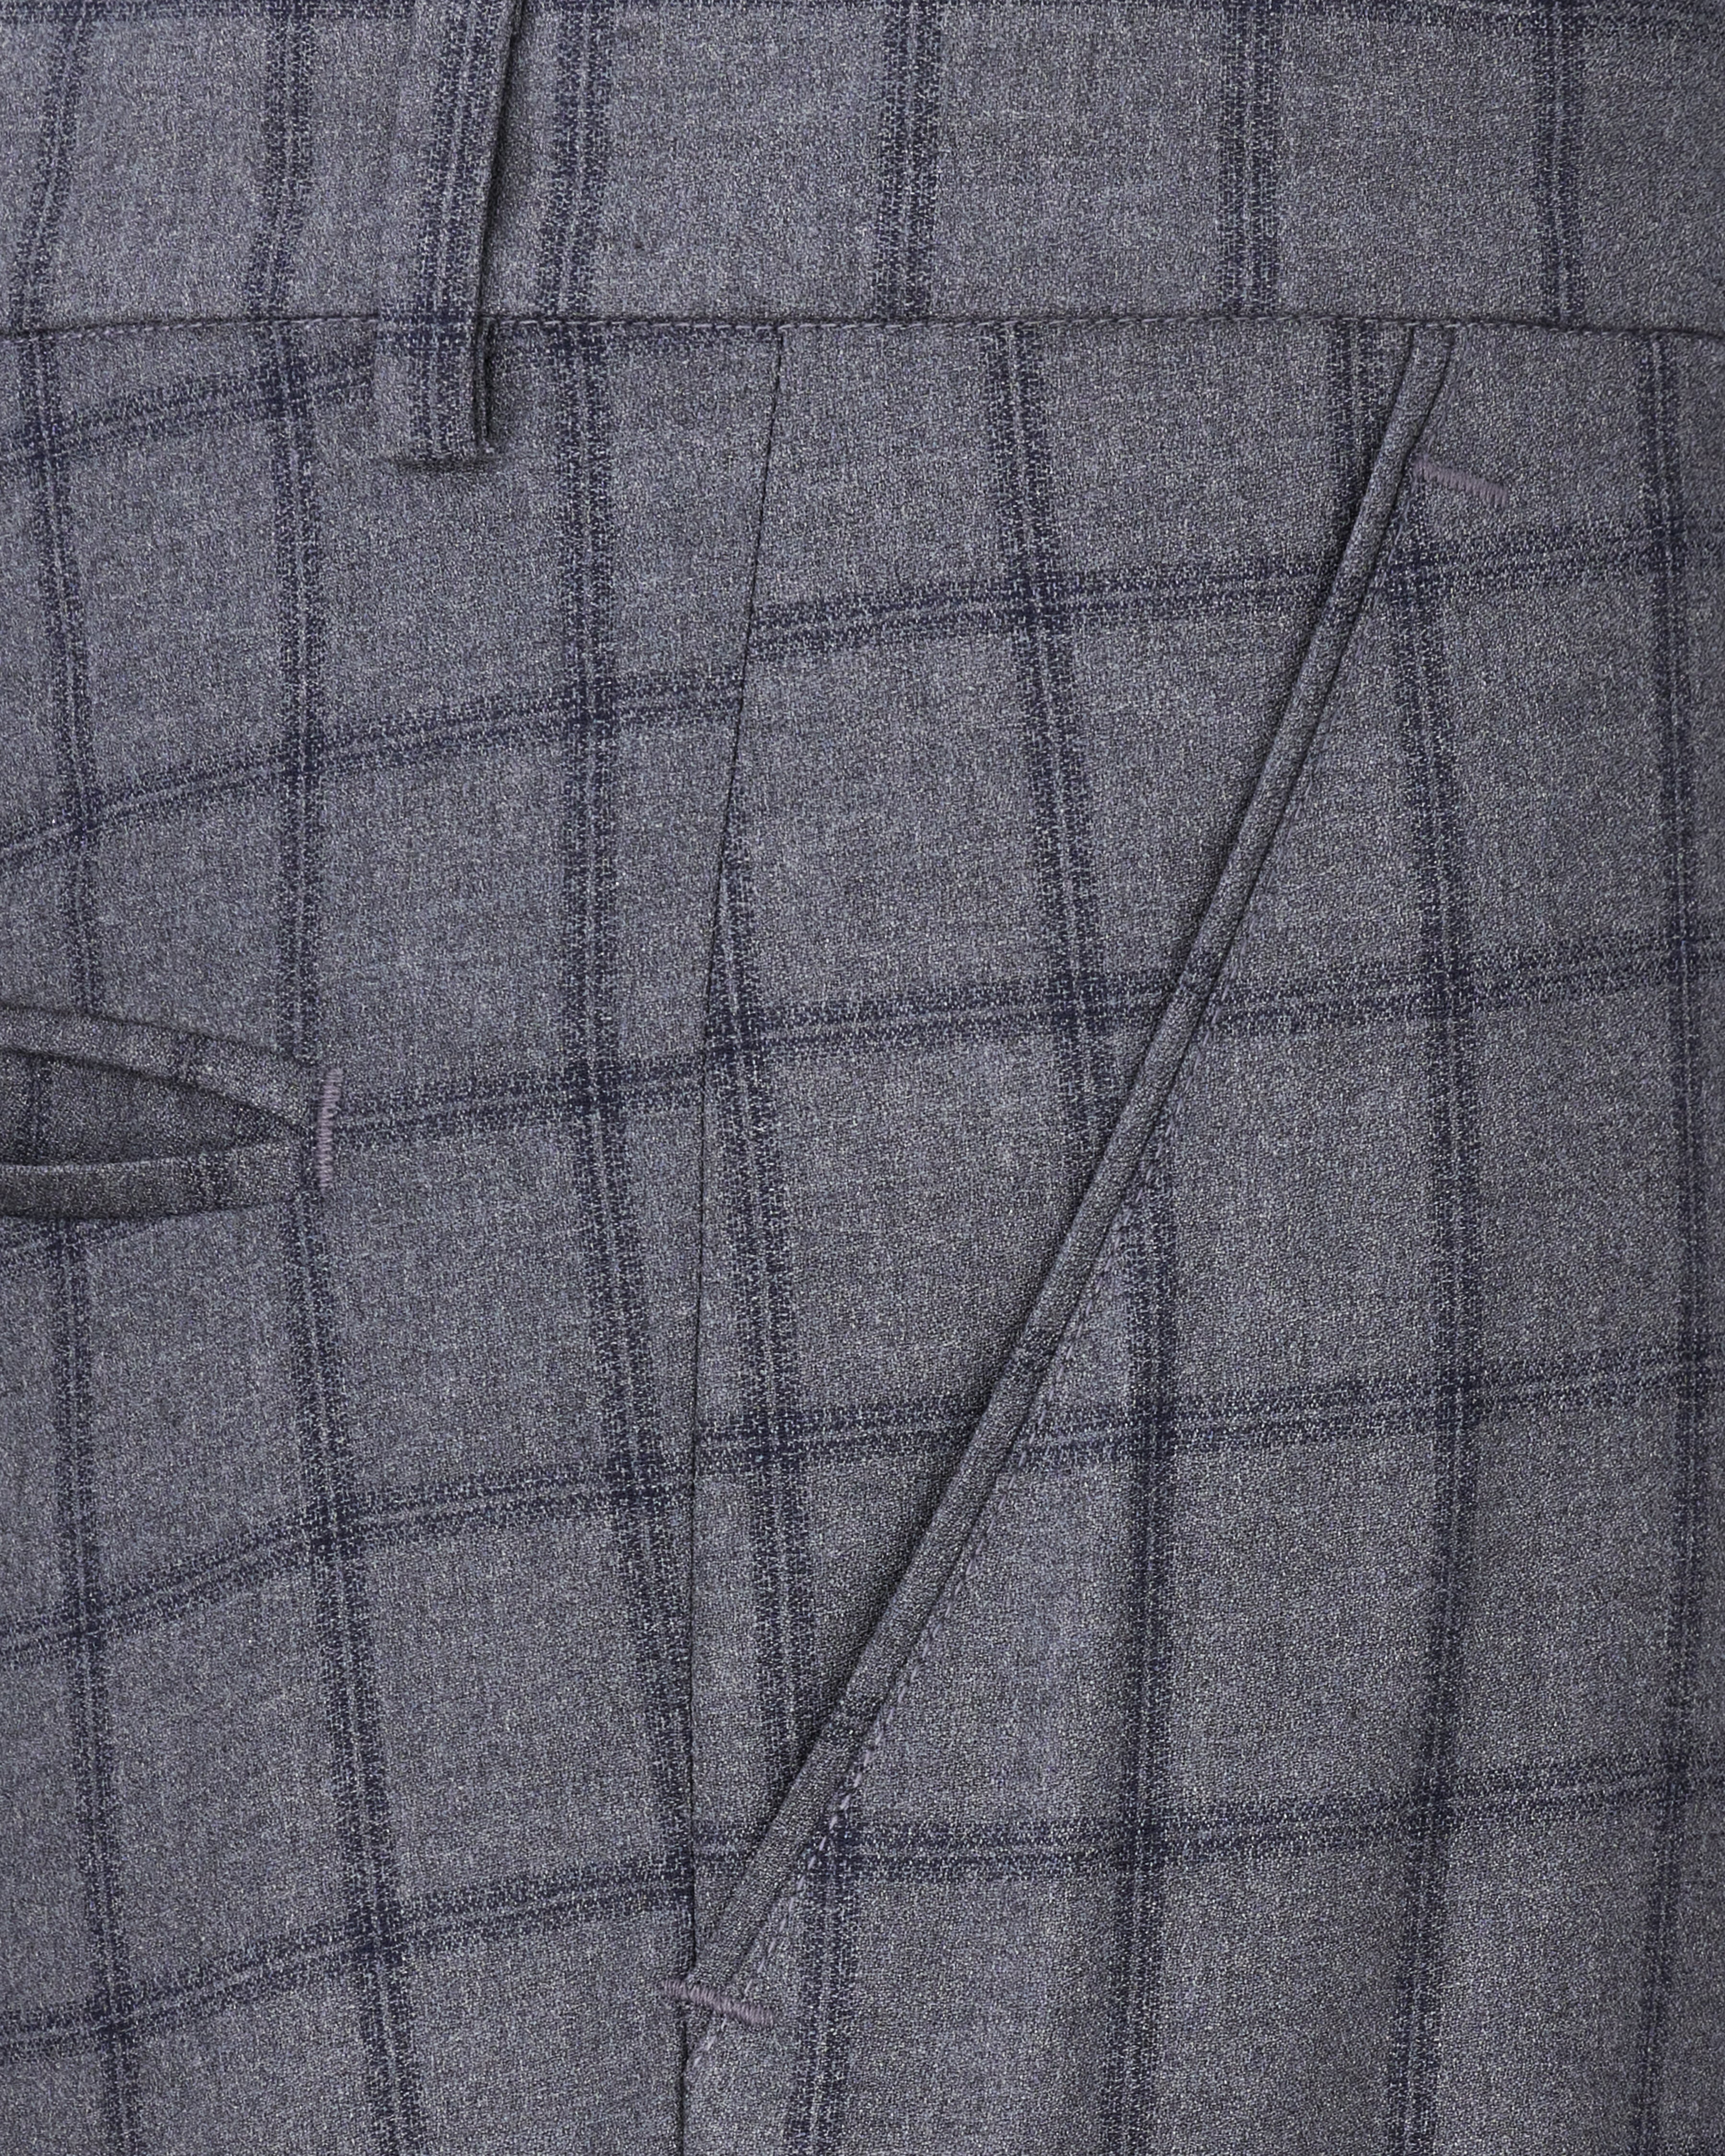 Wenge Gray Windowpane Double Breasted Designer Suit with Belt Closure ST2373-DB-D43-36, ST2373-DB-D43-38, ST2373-DB-D43-40, ST2373-DB-D43-42, ST2373-DB-D43-44, ST2373-DB-D43-46, ST2373-DB-D43-48, ST2373-DB-D43-50, ST2373-DB-D43-52, ST2373-DB-D43-54, ST2373-DB-D43-56, ST2373-DB-D43-58, ST2373-DB-D43-60